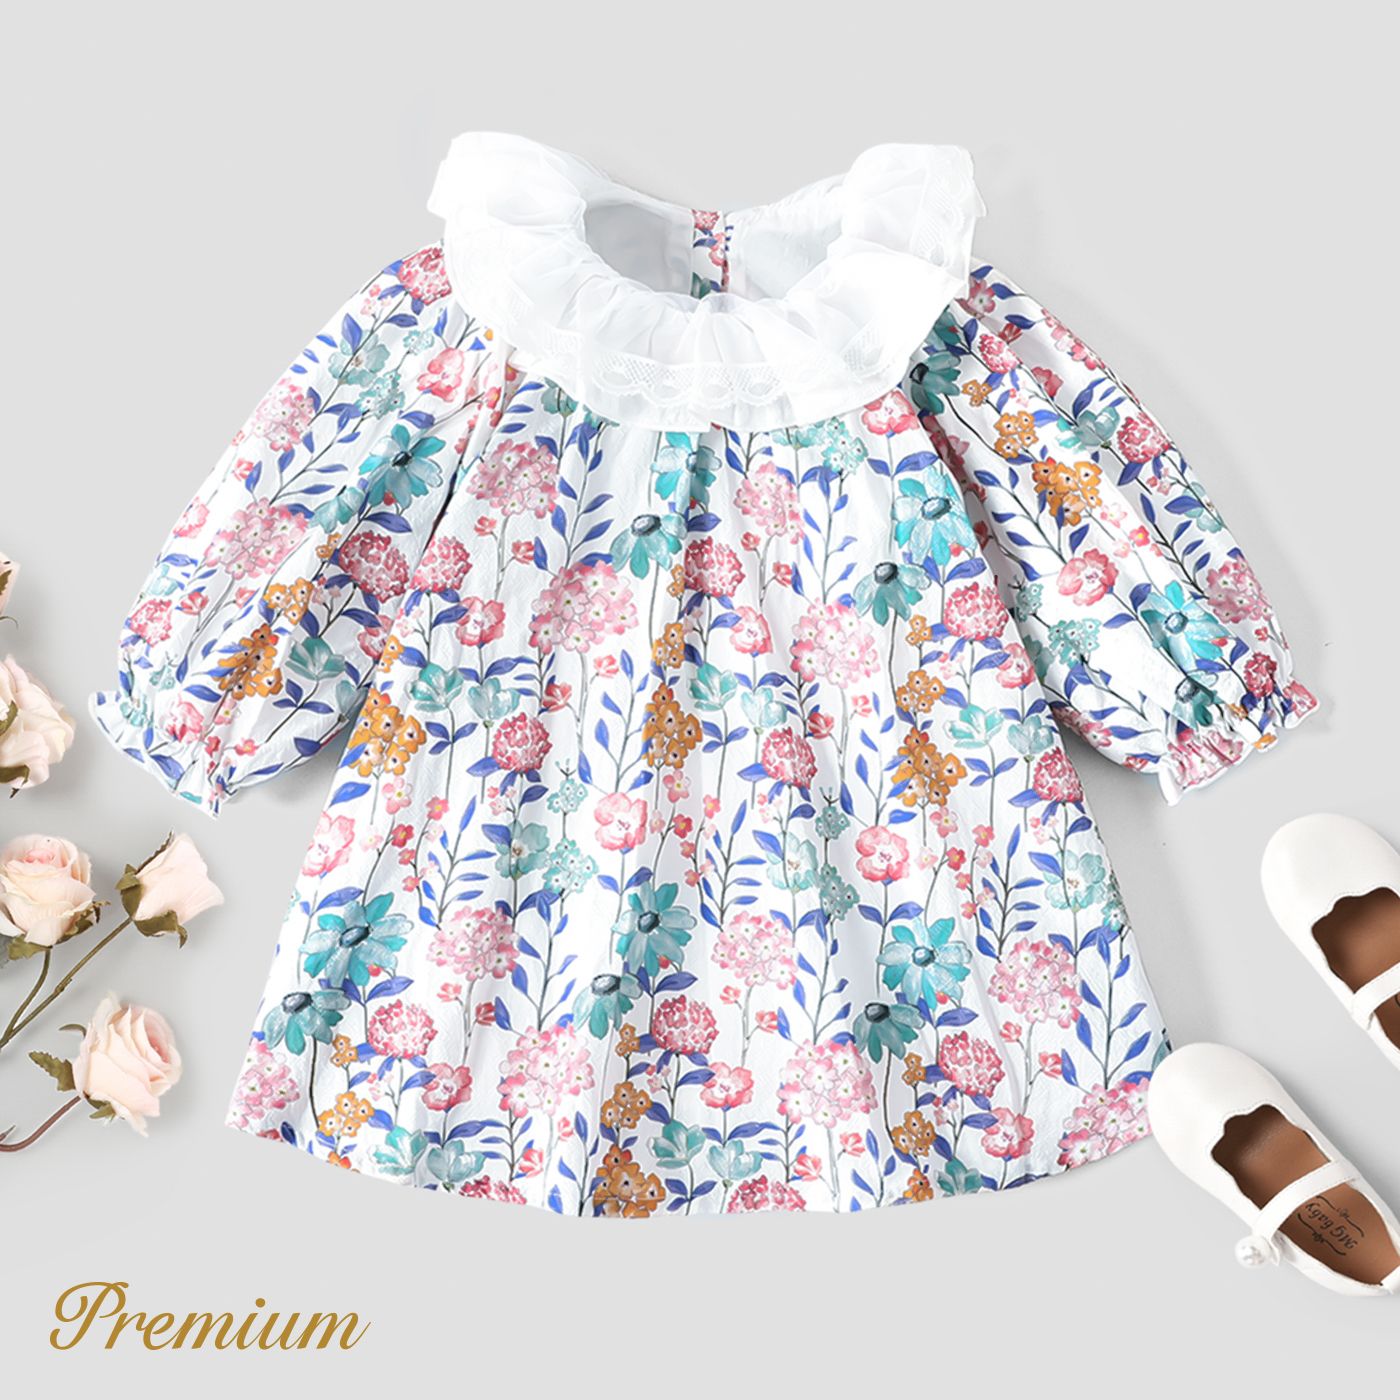 100% Cotton Medium Thickness Long Sleeves Elegant Baby Girl Dress with Puff Sleeves and Floral Patte